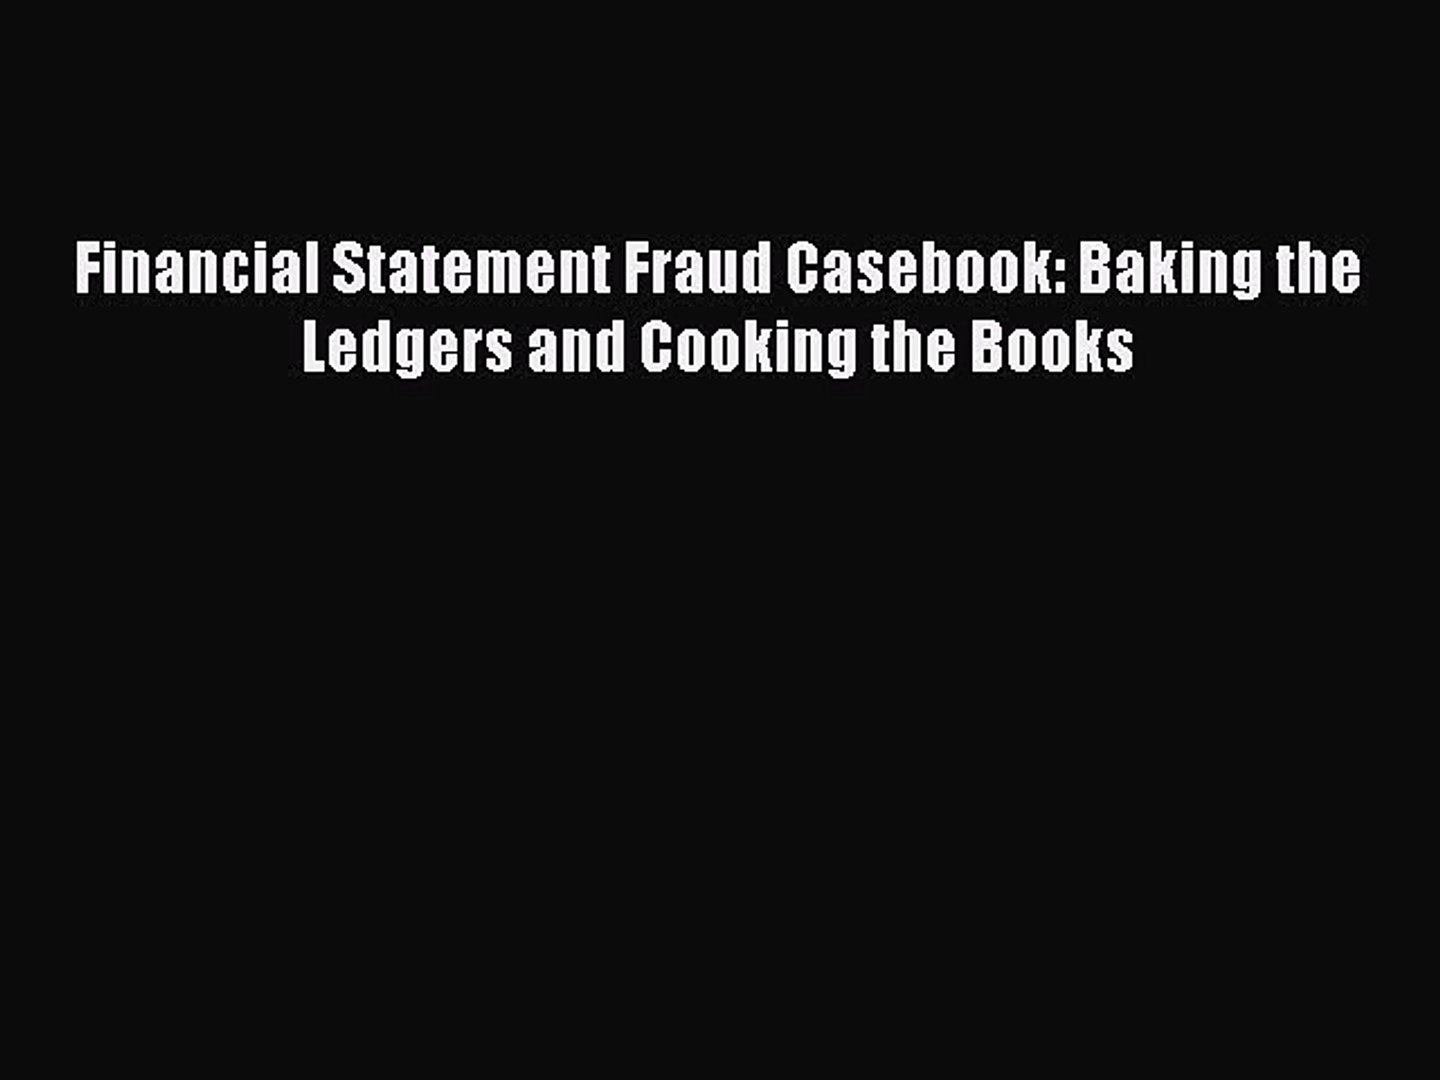 Financial Statement Fraud Casebook: Baking the Ledgers and Cooking the Books  PDF Download